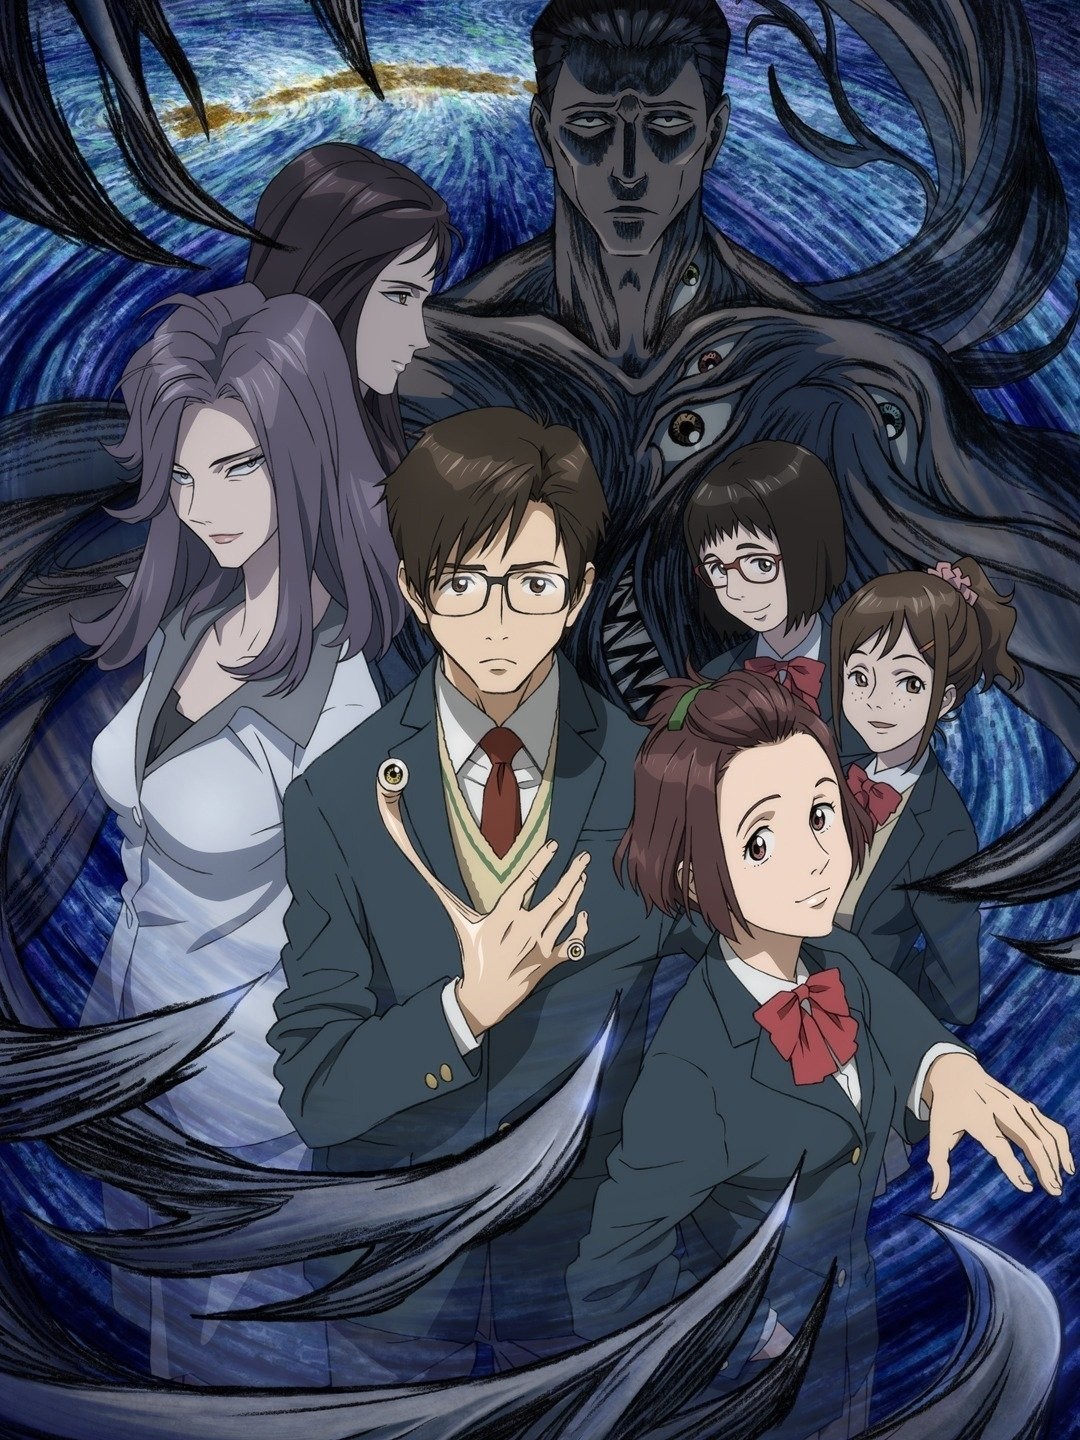 Parasyte: The Maxim Is a Must-Watch Anime For Body Horror Fans